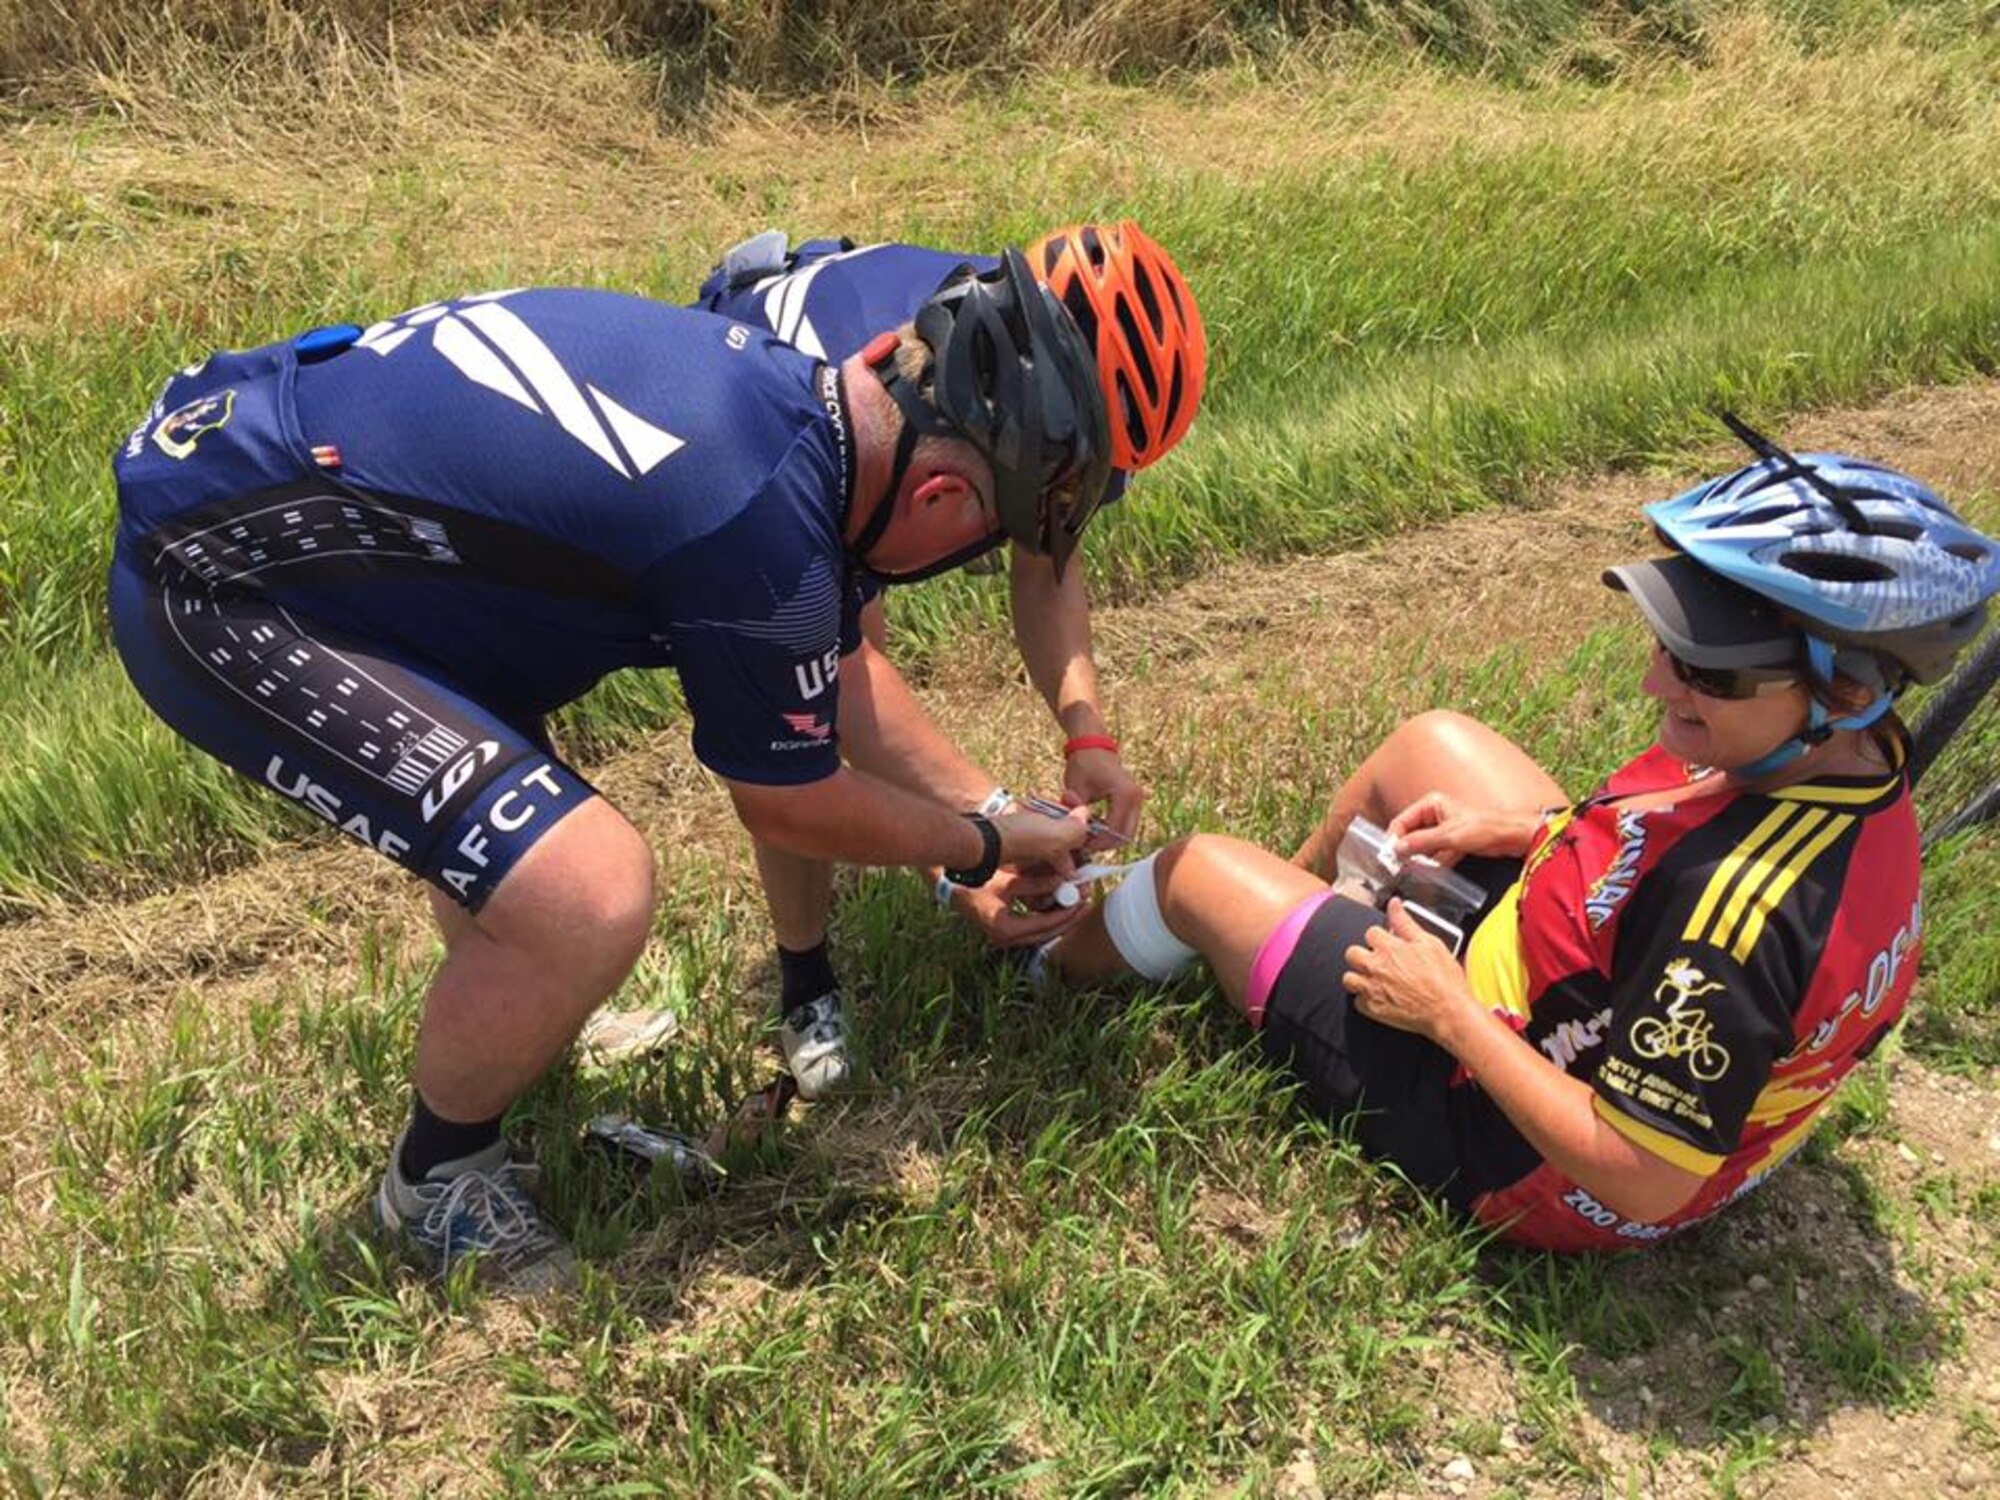 Members of the Air Force Cycling Team help an injured cyclist after she fell during the Register's Annual Great Bike Ride Across Iowa, in Charles City, Iowa, July 27, 2017. During the RAGBRAI, AFCT members provided assistance to more than 5,000 cyclists. The team works to promote the Air Force by interacting with the American public at cycling events across the United States. (Courtesy Photo)